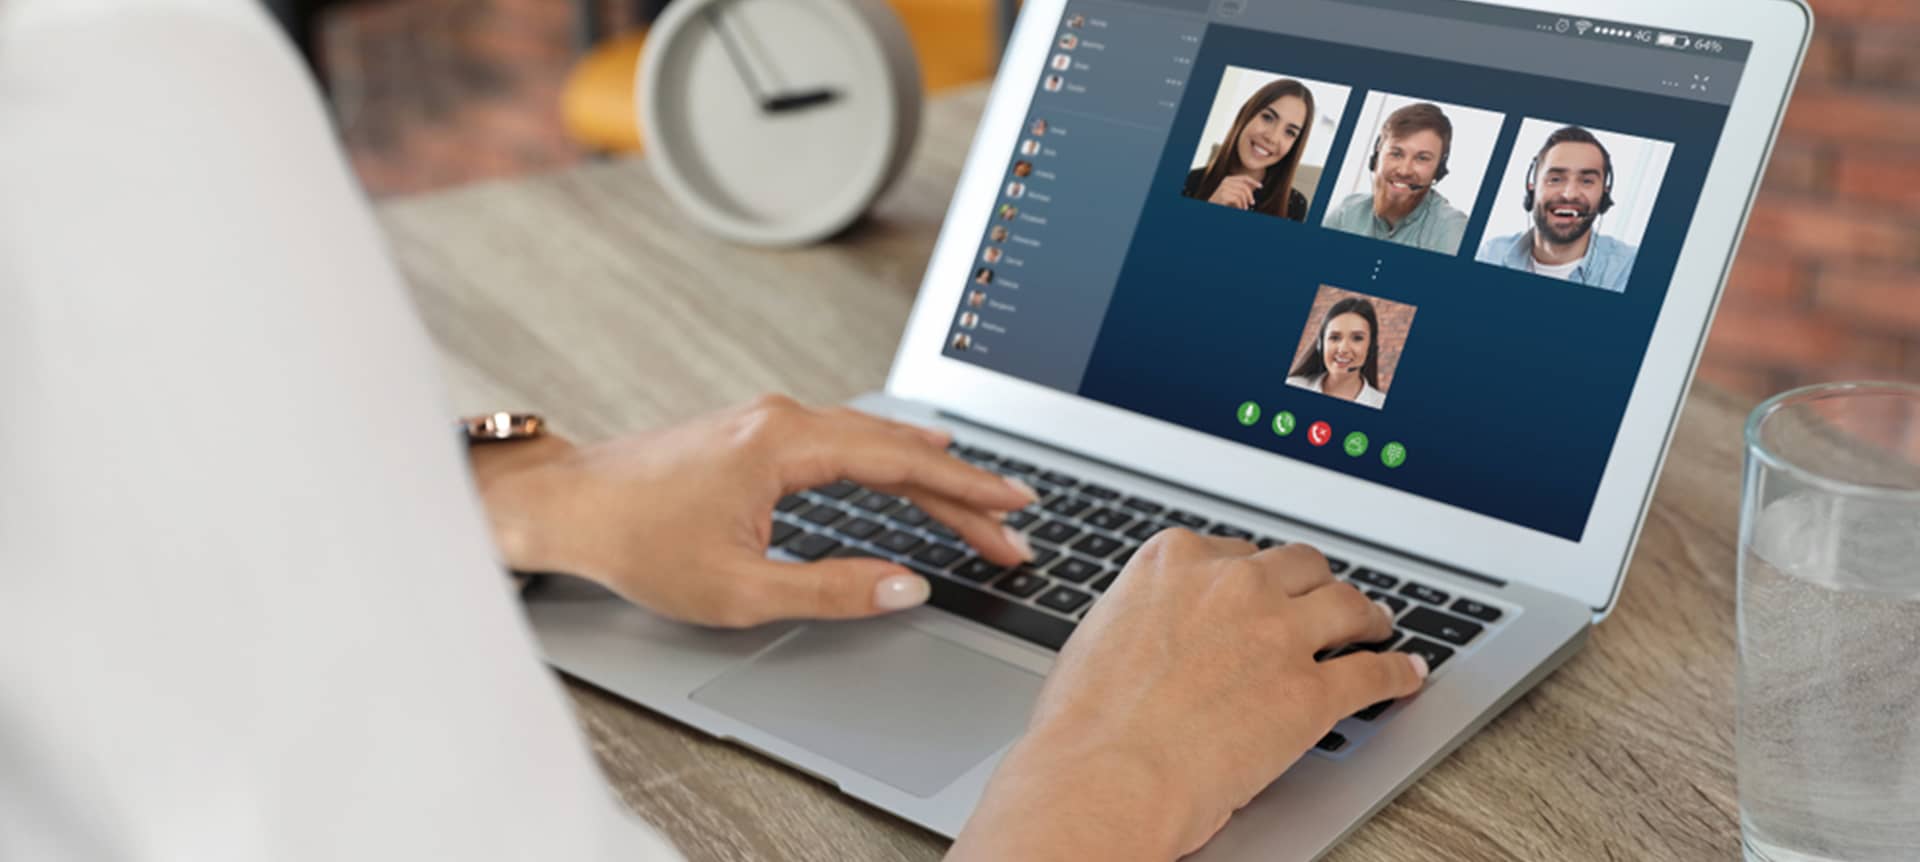 5 Proven Ways Startups Can Interview at Scale with Video Interviewing Software